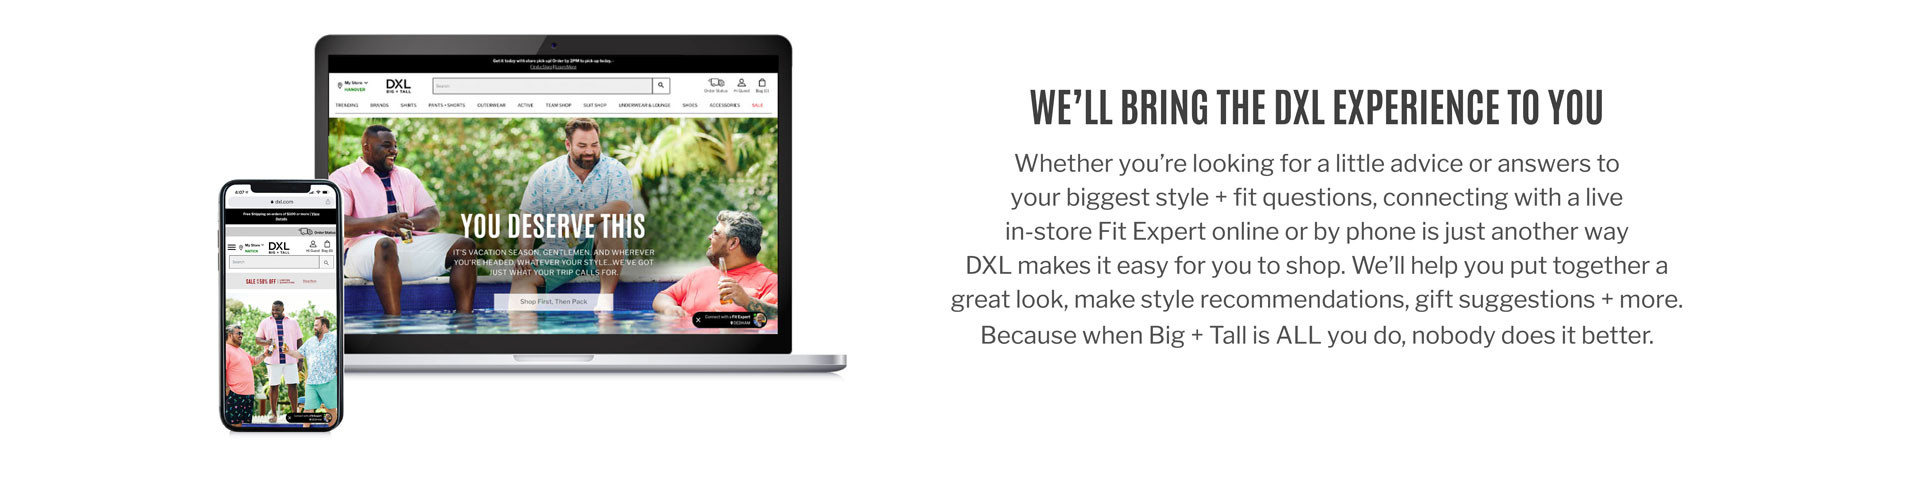 WE’LL BRING THE DXL EXPERIENCE TO YOU | Whether you’re looking for a little advice or answers to your biggest style + fit questions, connecting with a live in-store Fit Expert online or by phone is just another way DXL makes it easy for you to shop. We’ll help you put together a great look, make style recommendations, gift suggestions + more. Because when Big + Tall is ALL you do, nobody does it better.